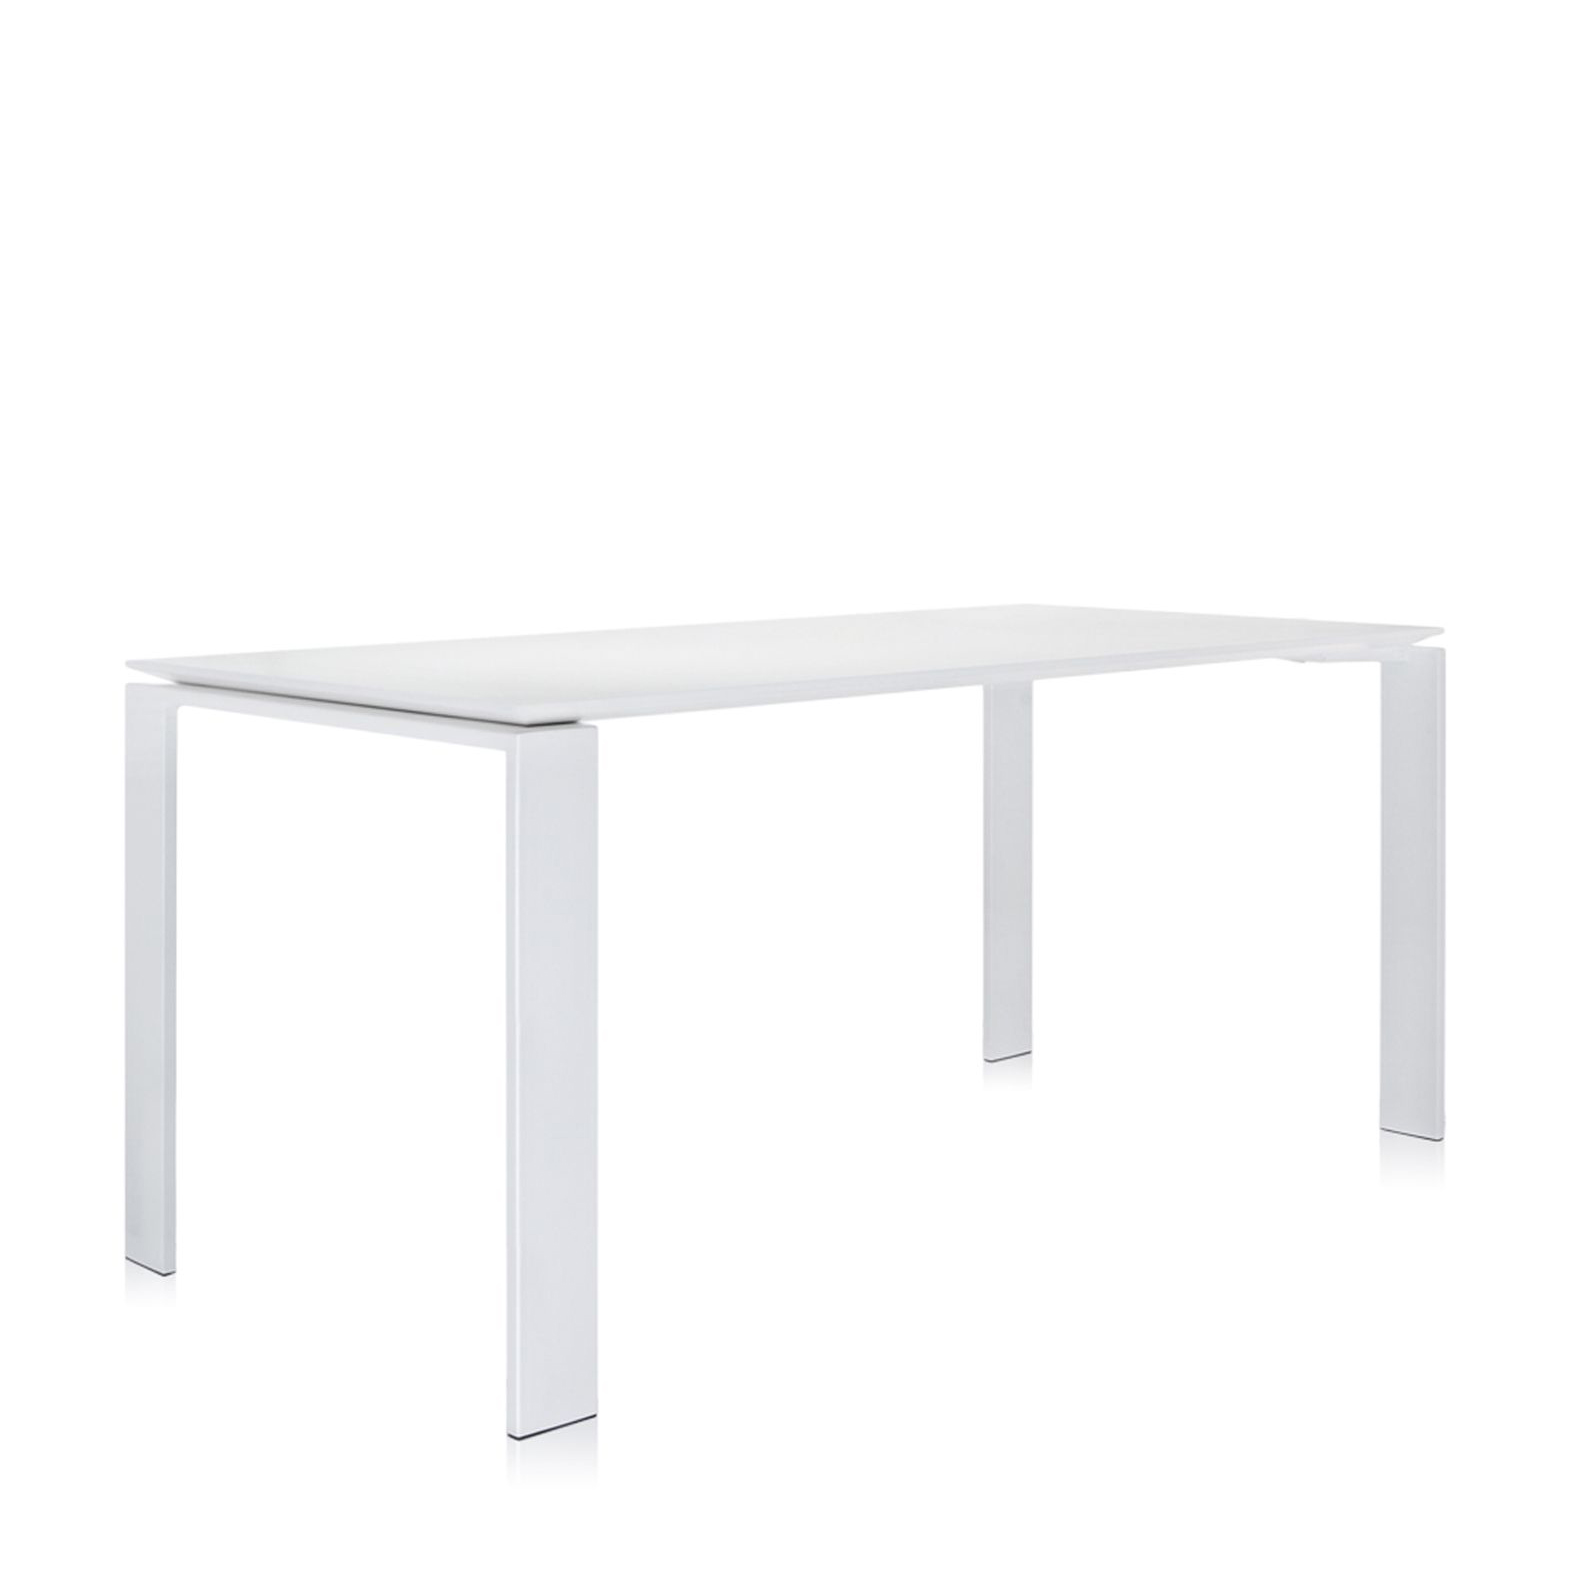 Buy the Kartell Four Outdoor table online - Connections At Home